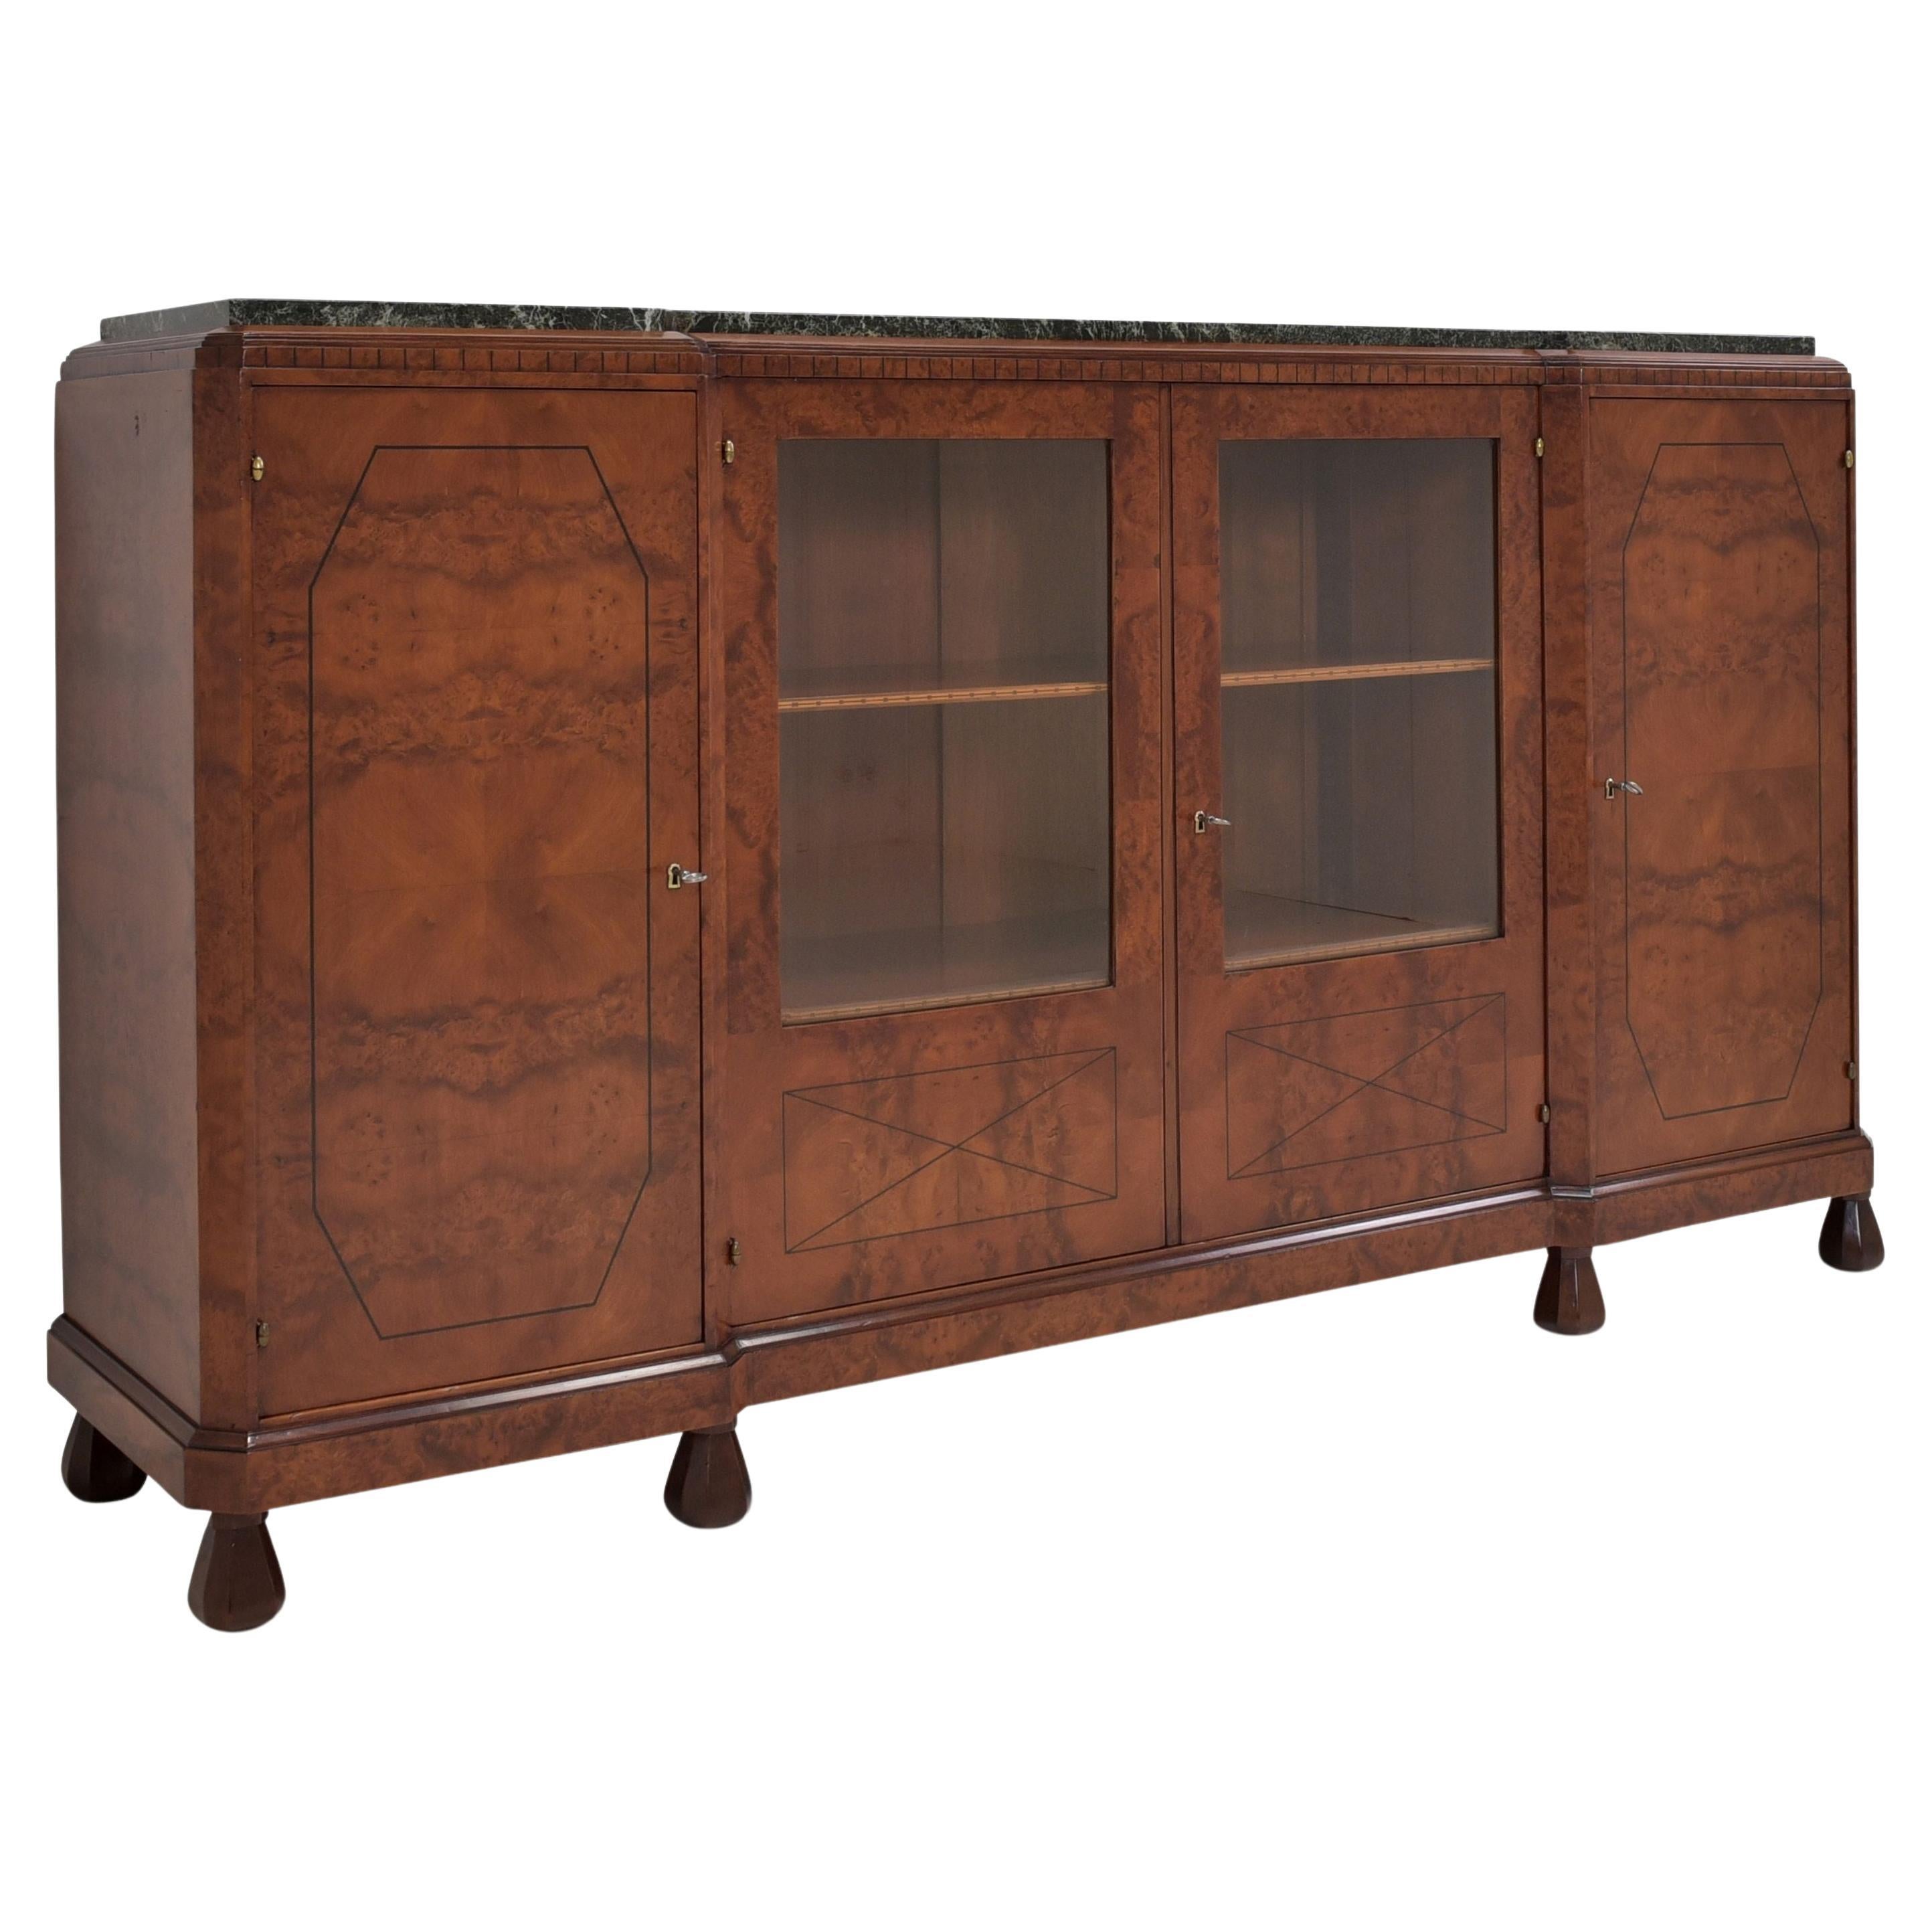 Art Deco XL Showcase Sideboard in Root Wood, 1930 For Sale